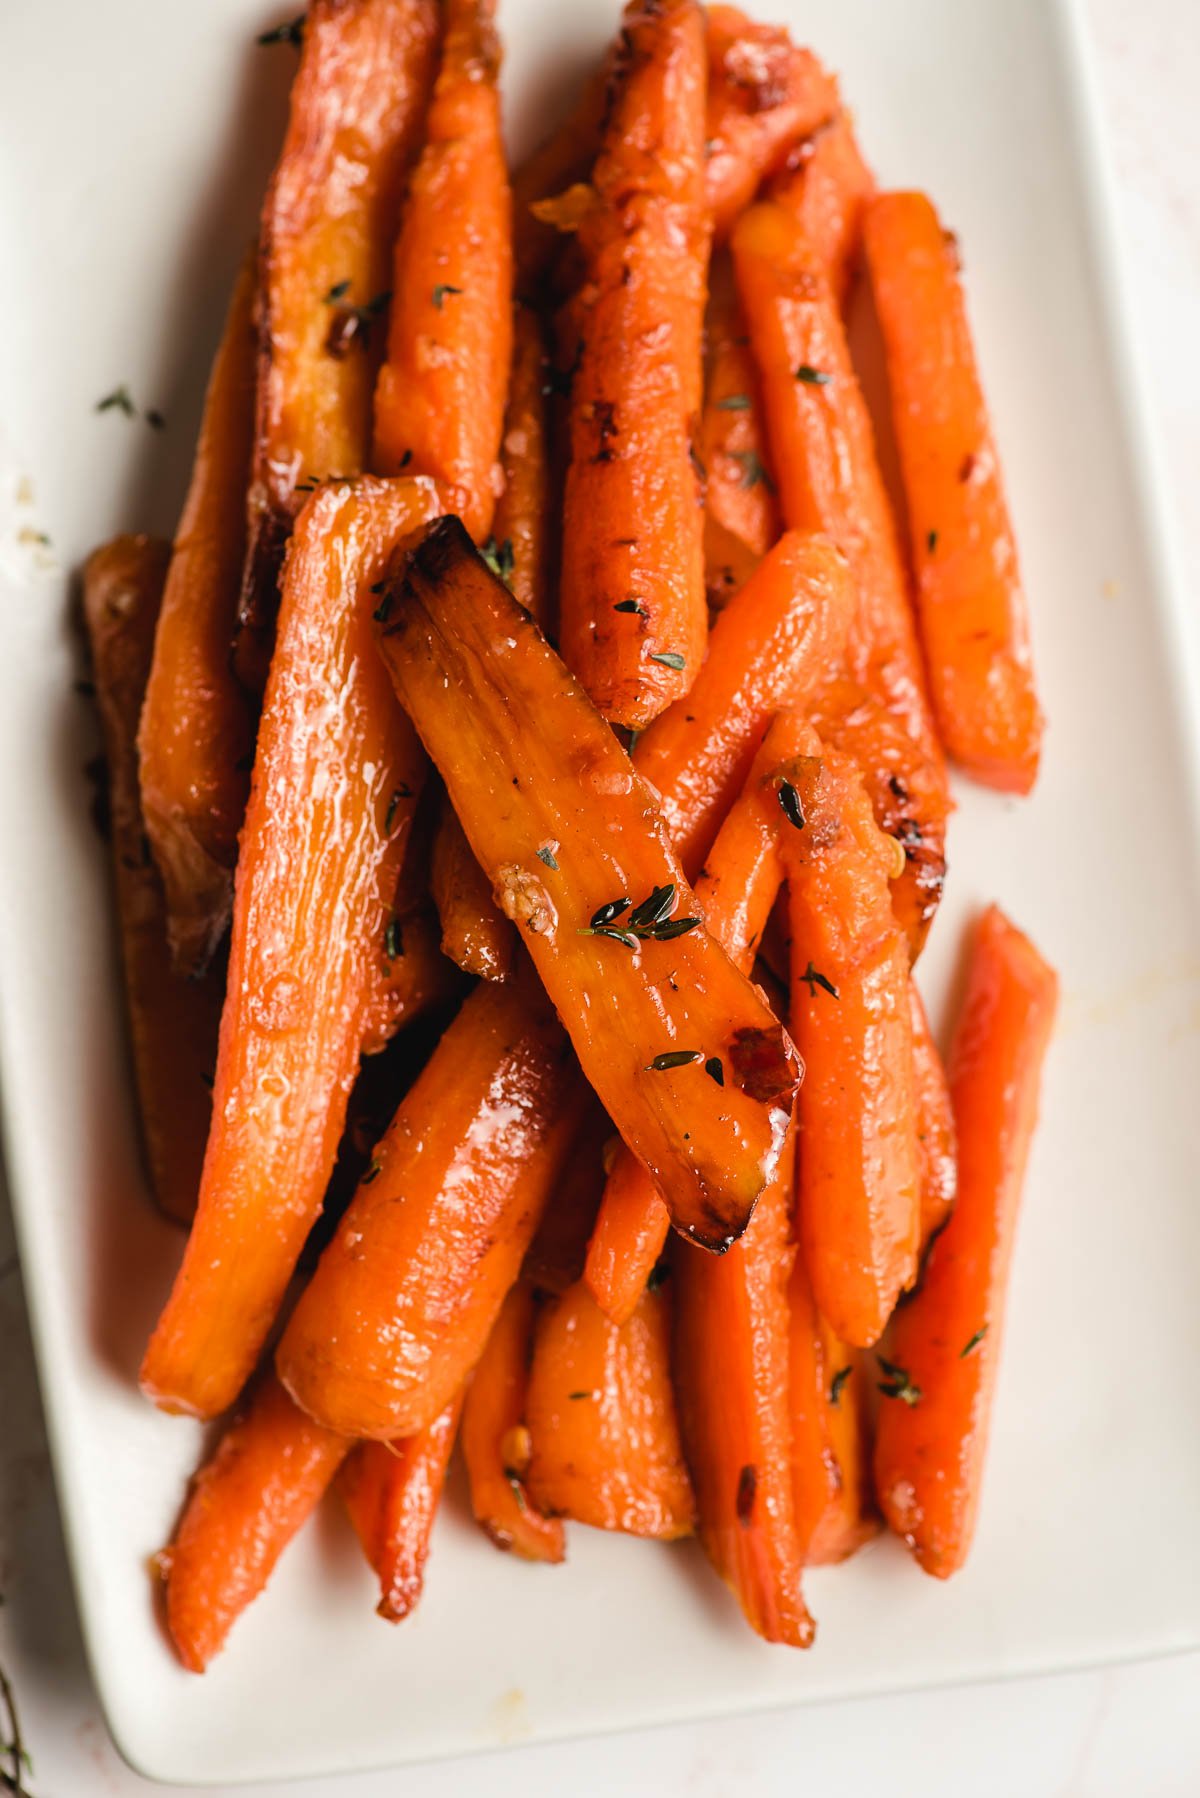 A serving plate of sauteed carrots.